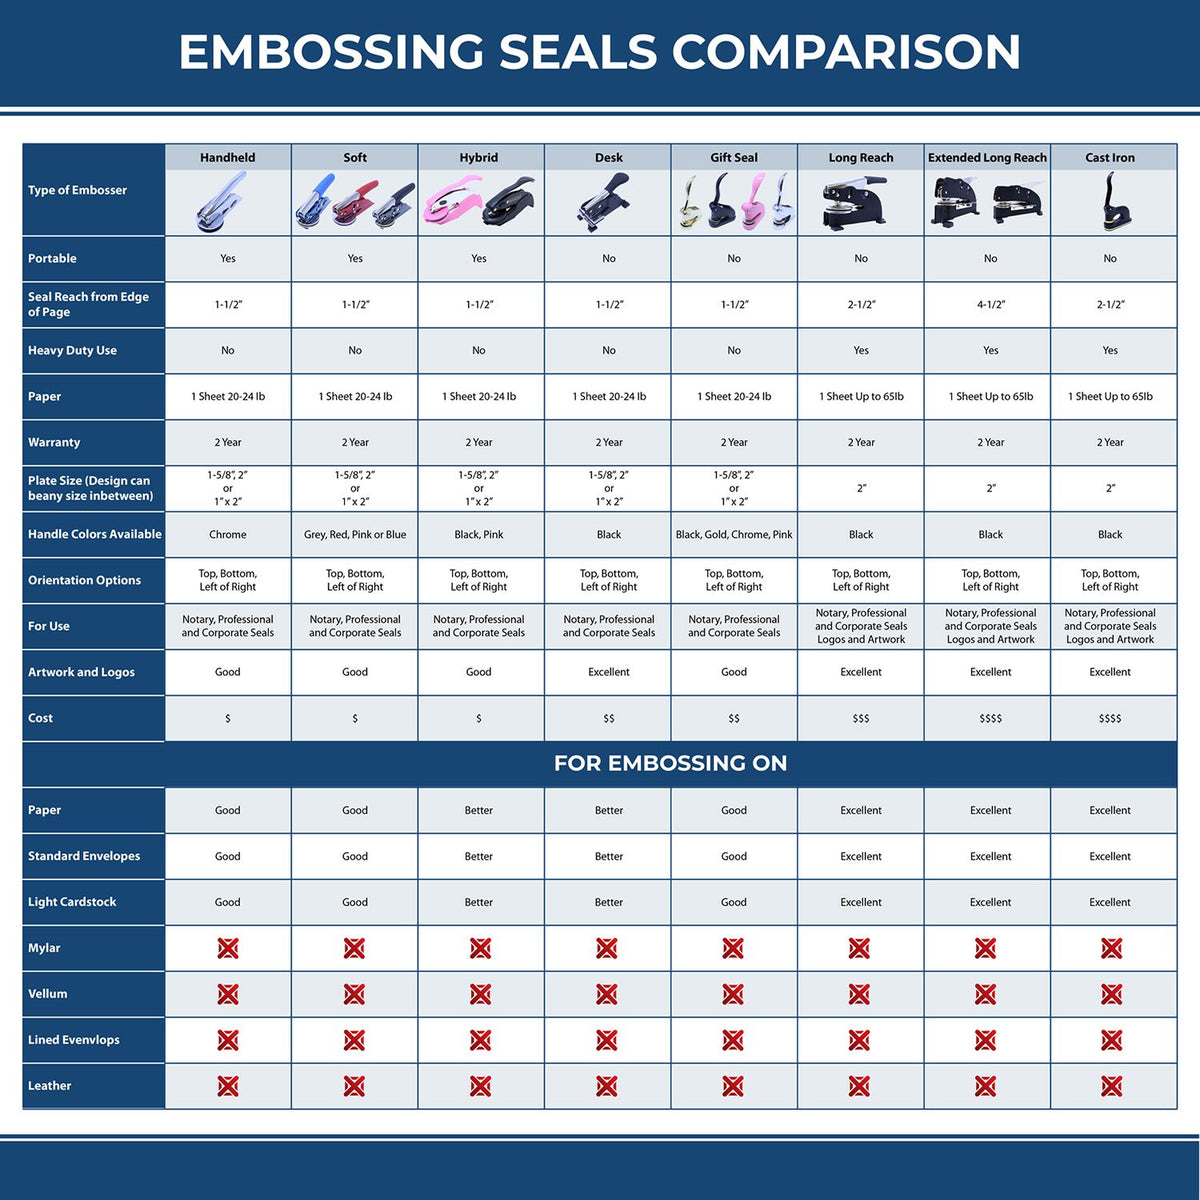 A comparison chart for the different types of mount models available for the Heavy Duty Cast Iron Maryland Engineer Seal Embosser.